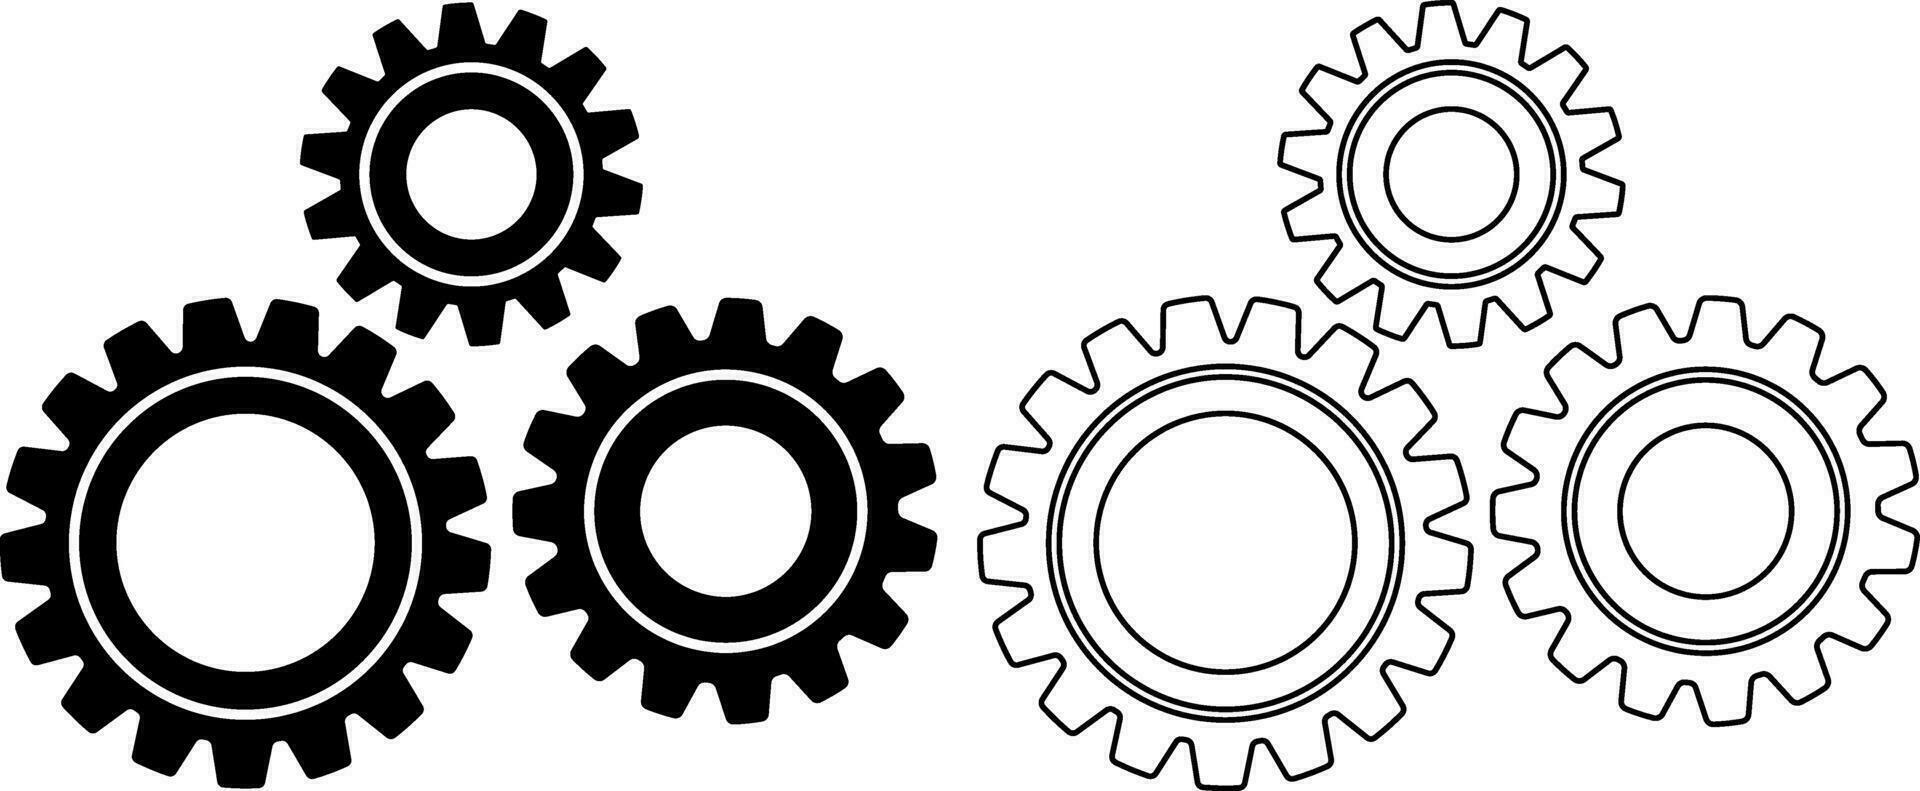 outline silhouette gear icon set vector